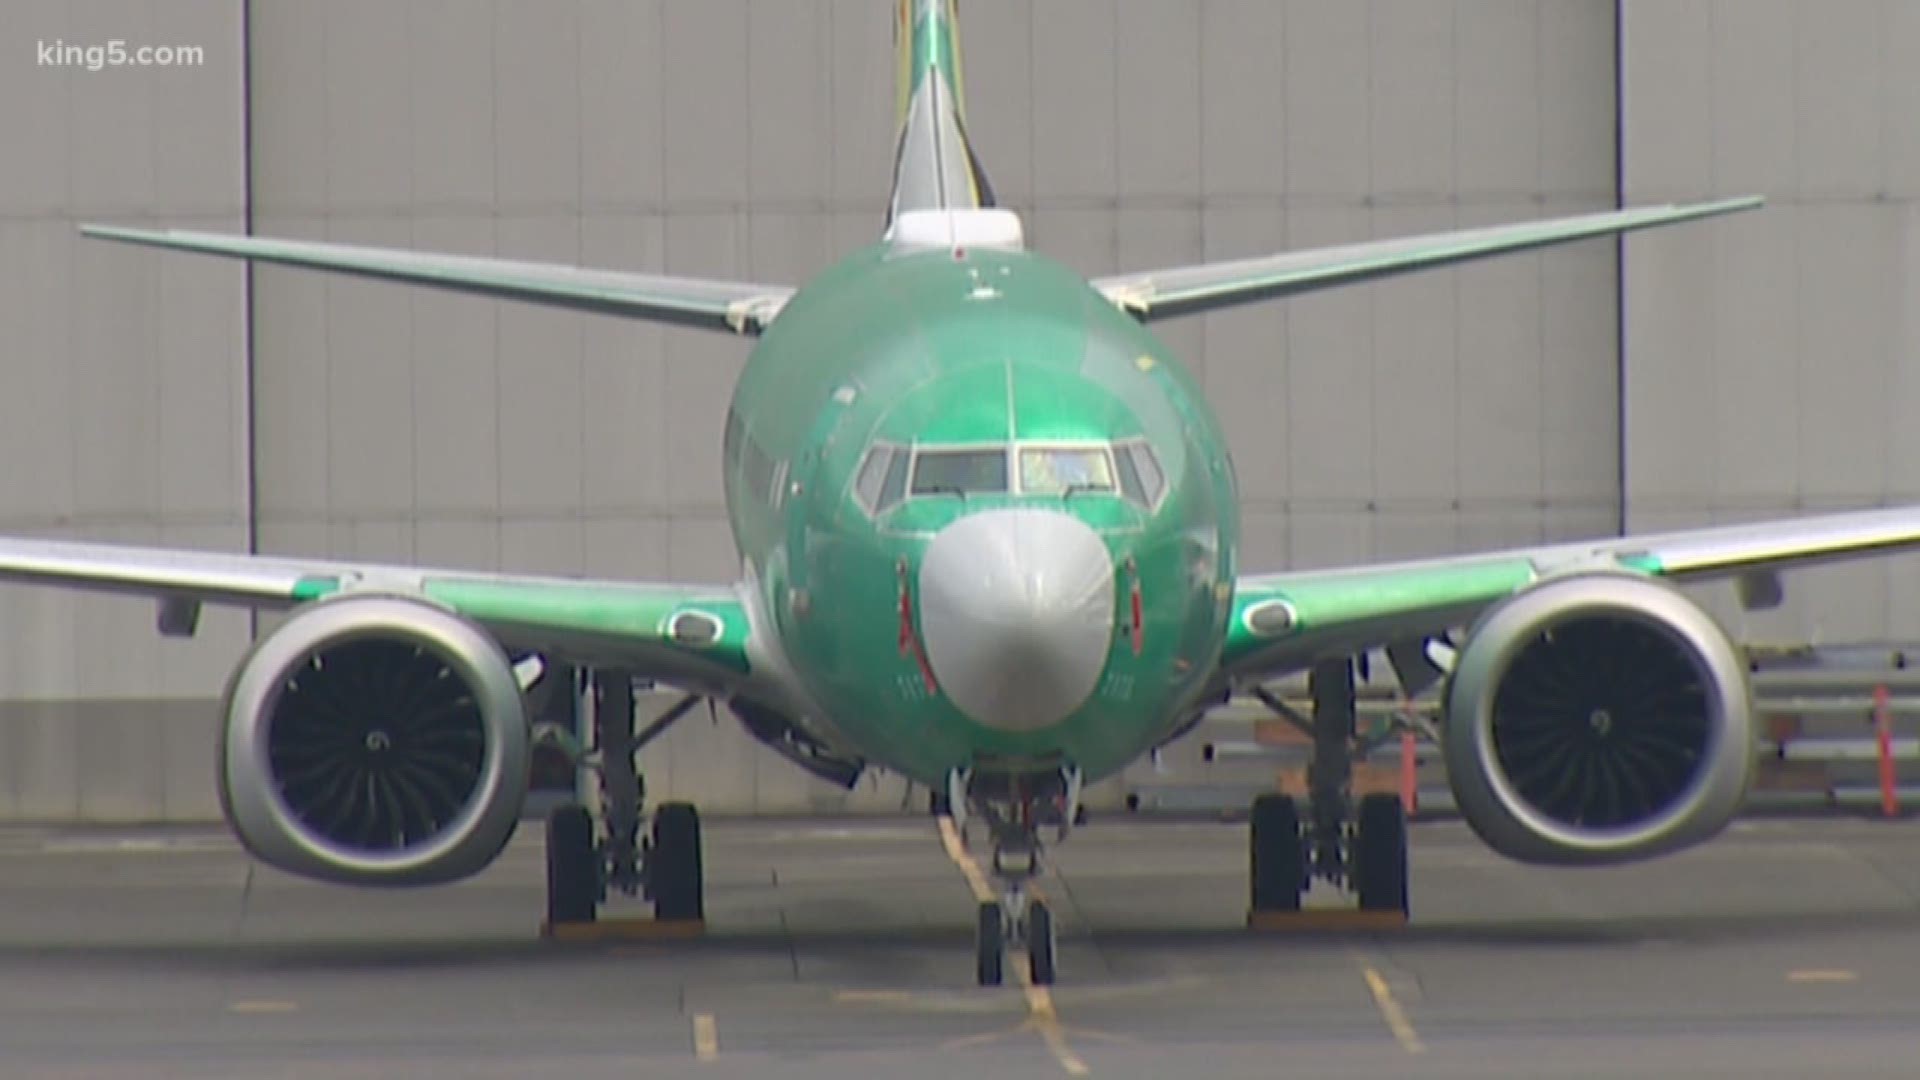 Boeing speculates the 737 MAX will be back in the air by the middle of 2020.